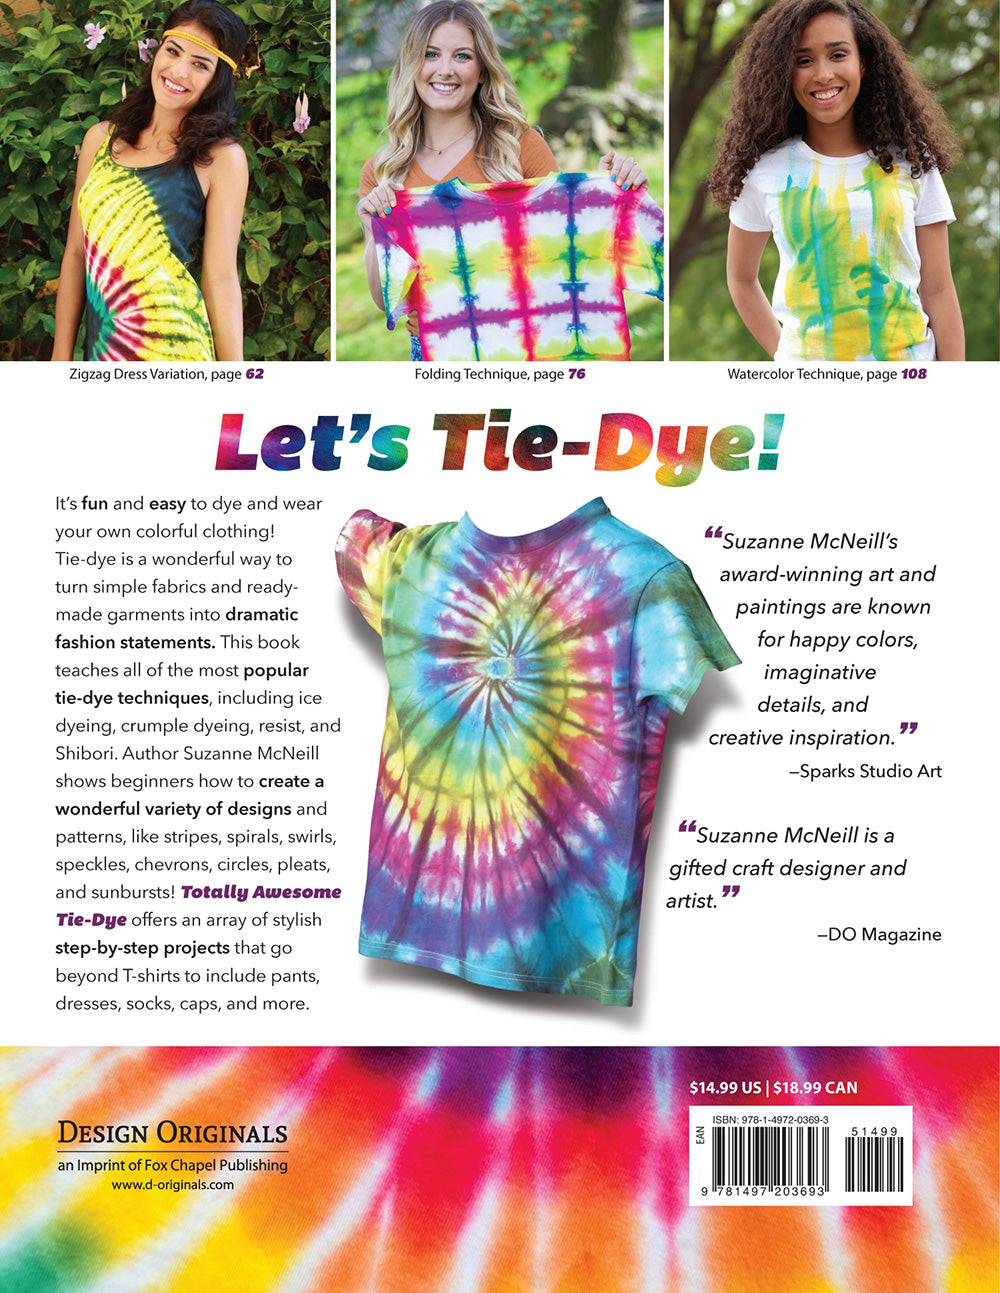 Totally Awesome Tie-Dye